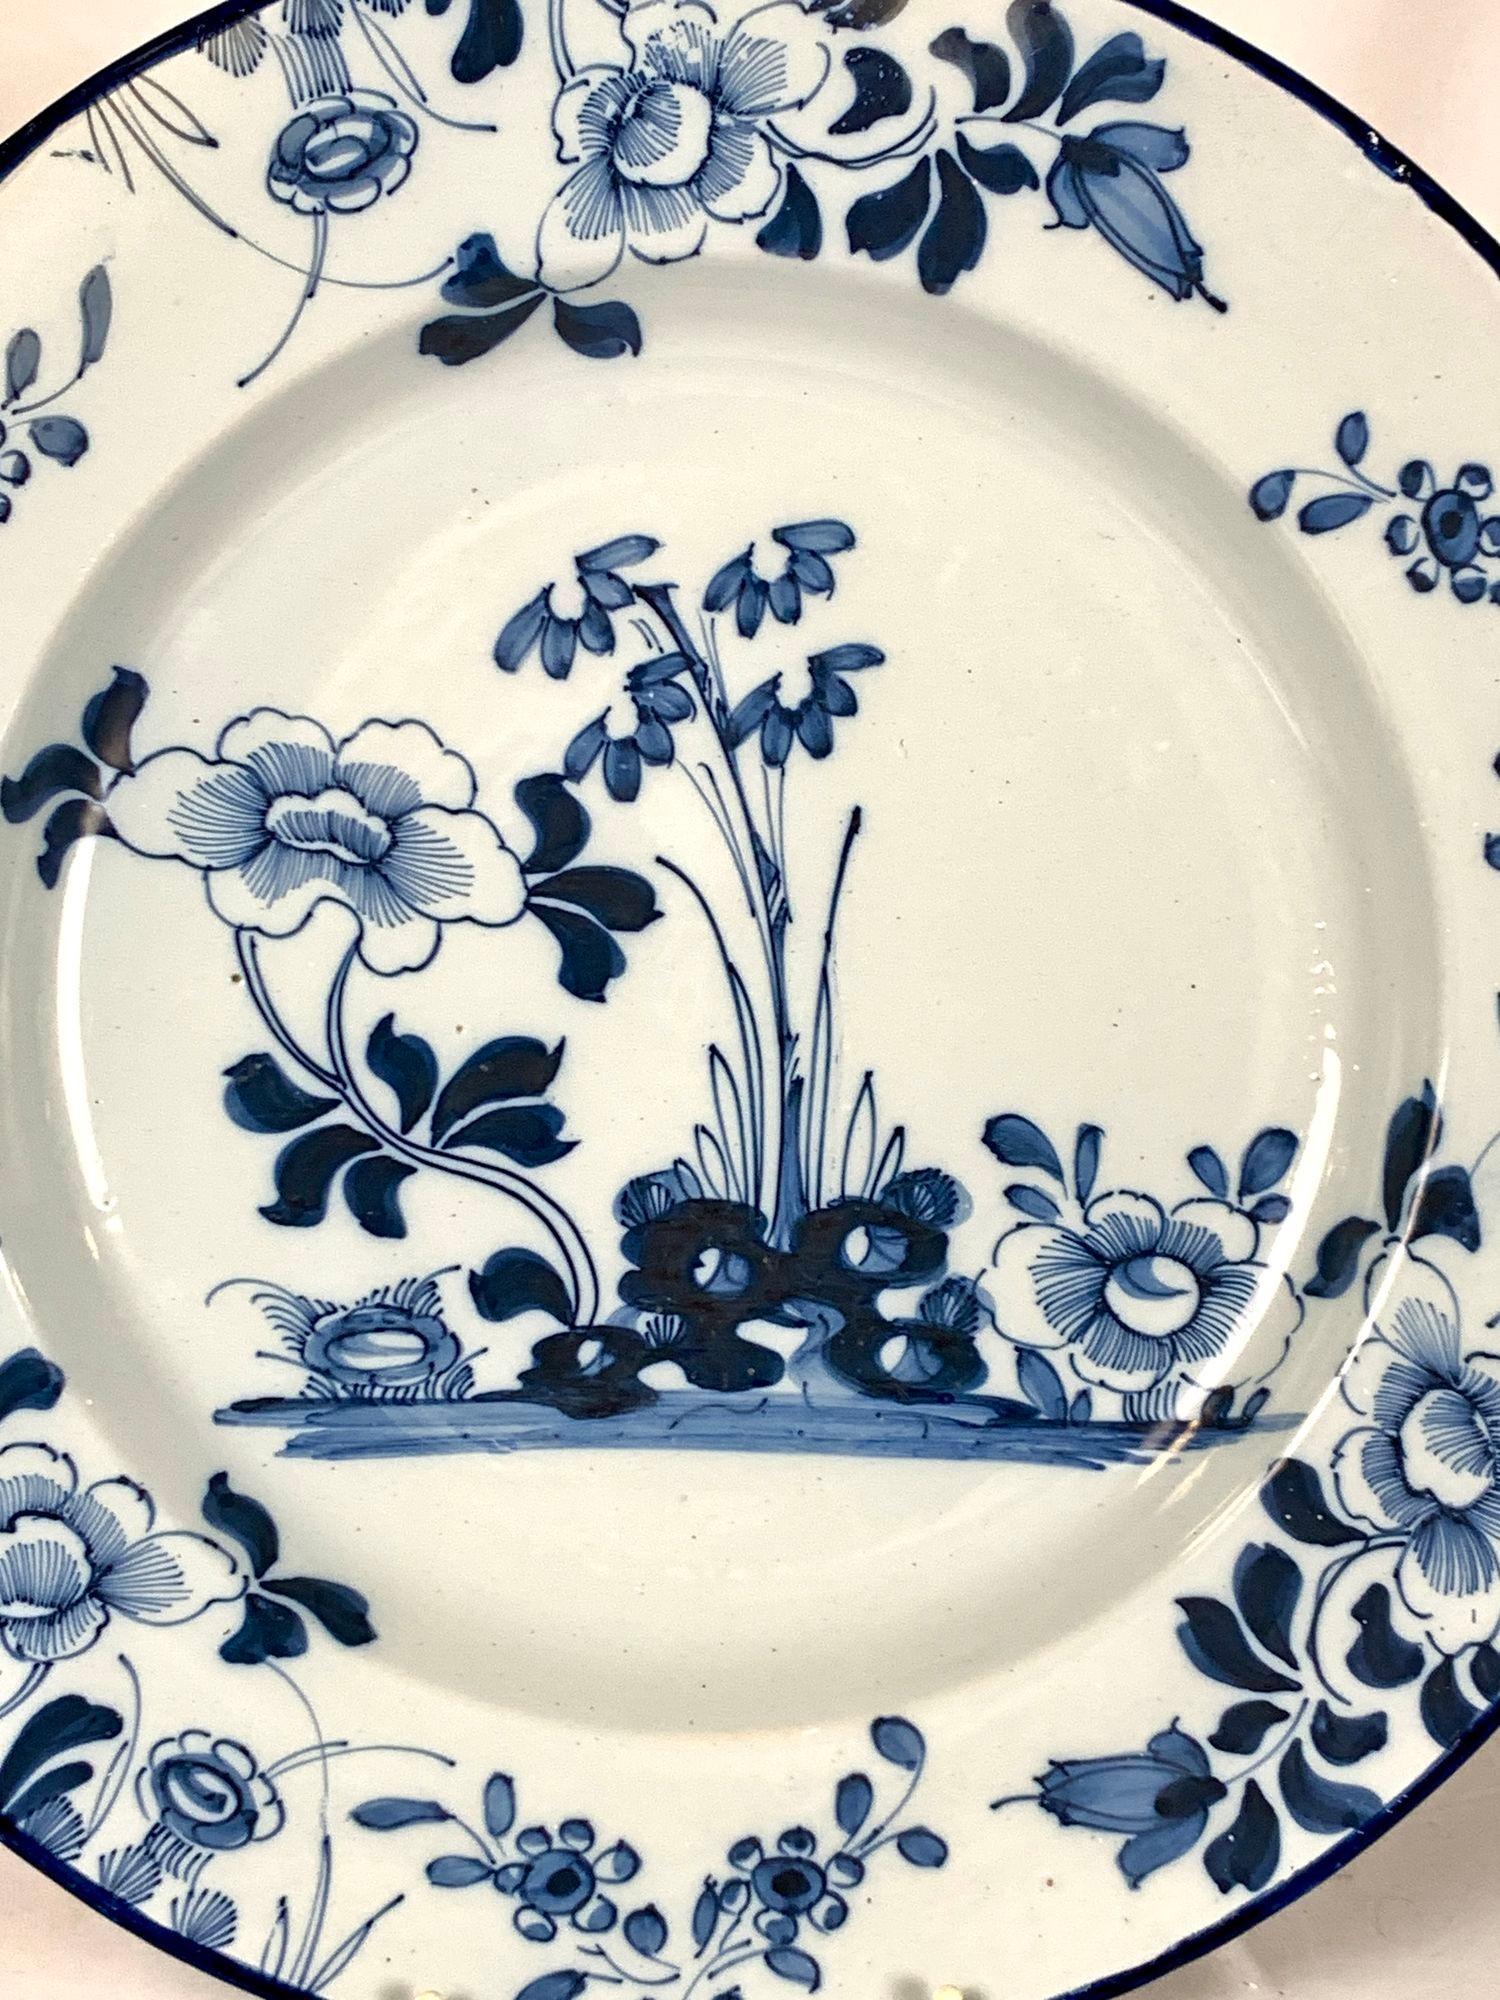 This blue and white Dutch Delft charger was hand painted in the mid-18th century, circa 1760.
The artist has created a lovely garden scene using two shades of cobalt blue.
The simple but elegant decoration features flowers in full bloom, leaves, and